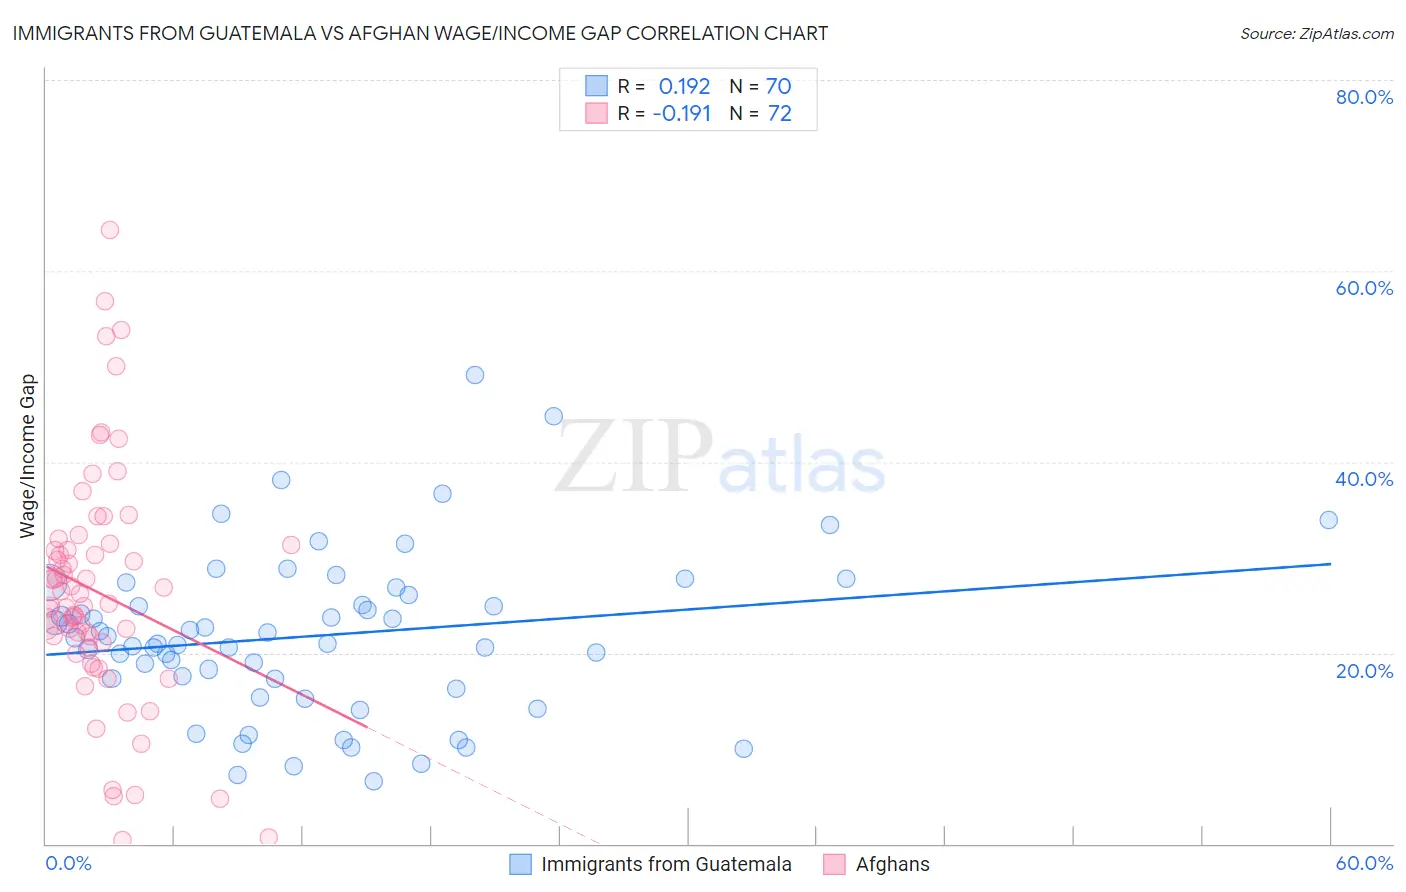 Immigrants from Guatemala vs Afghan Wage/Income Gap